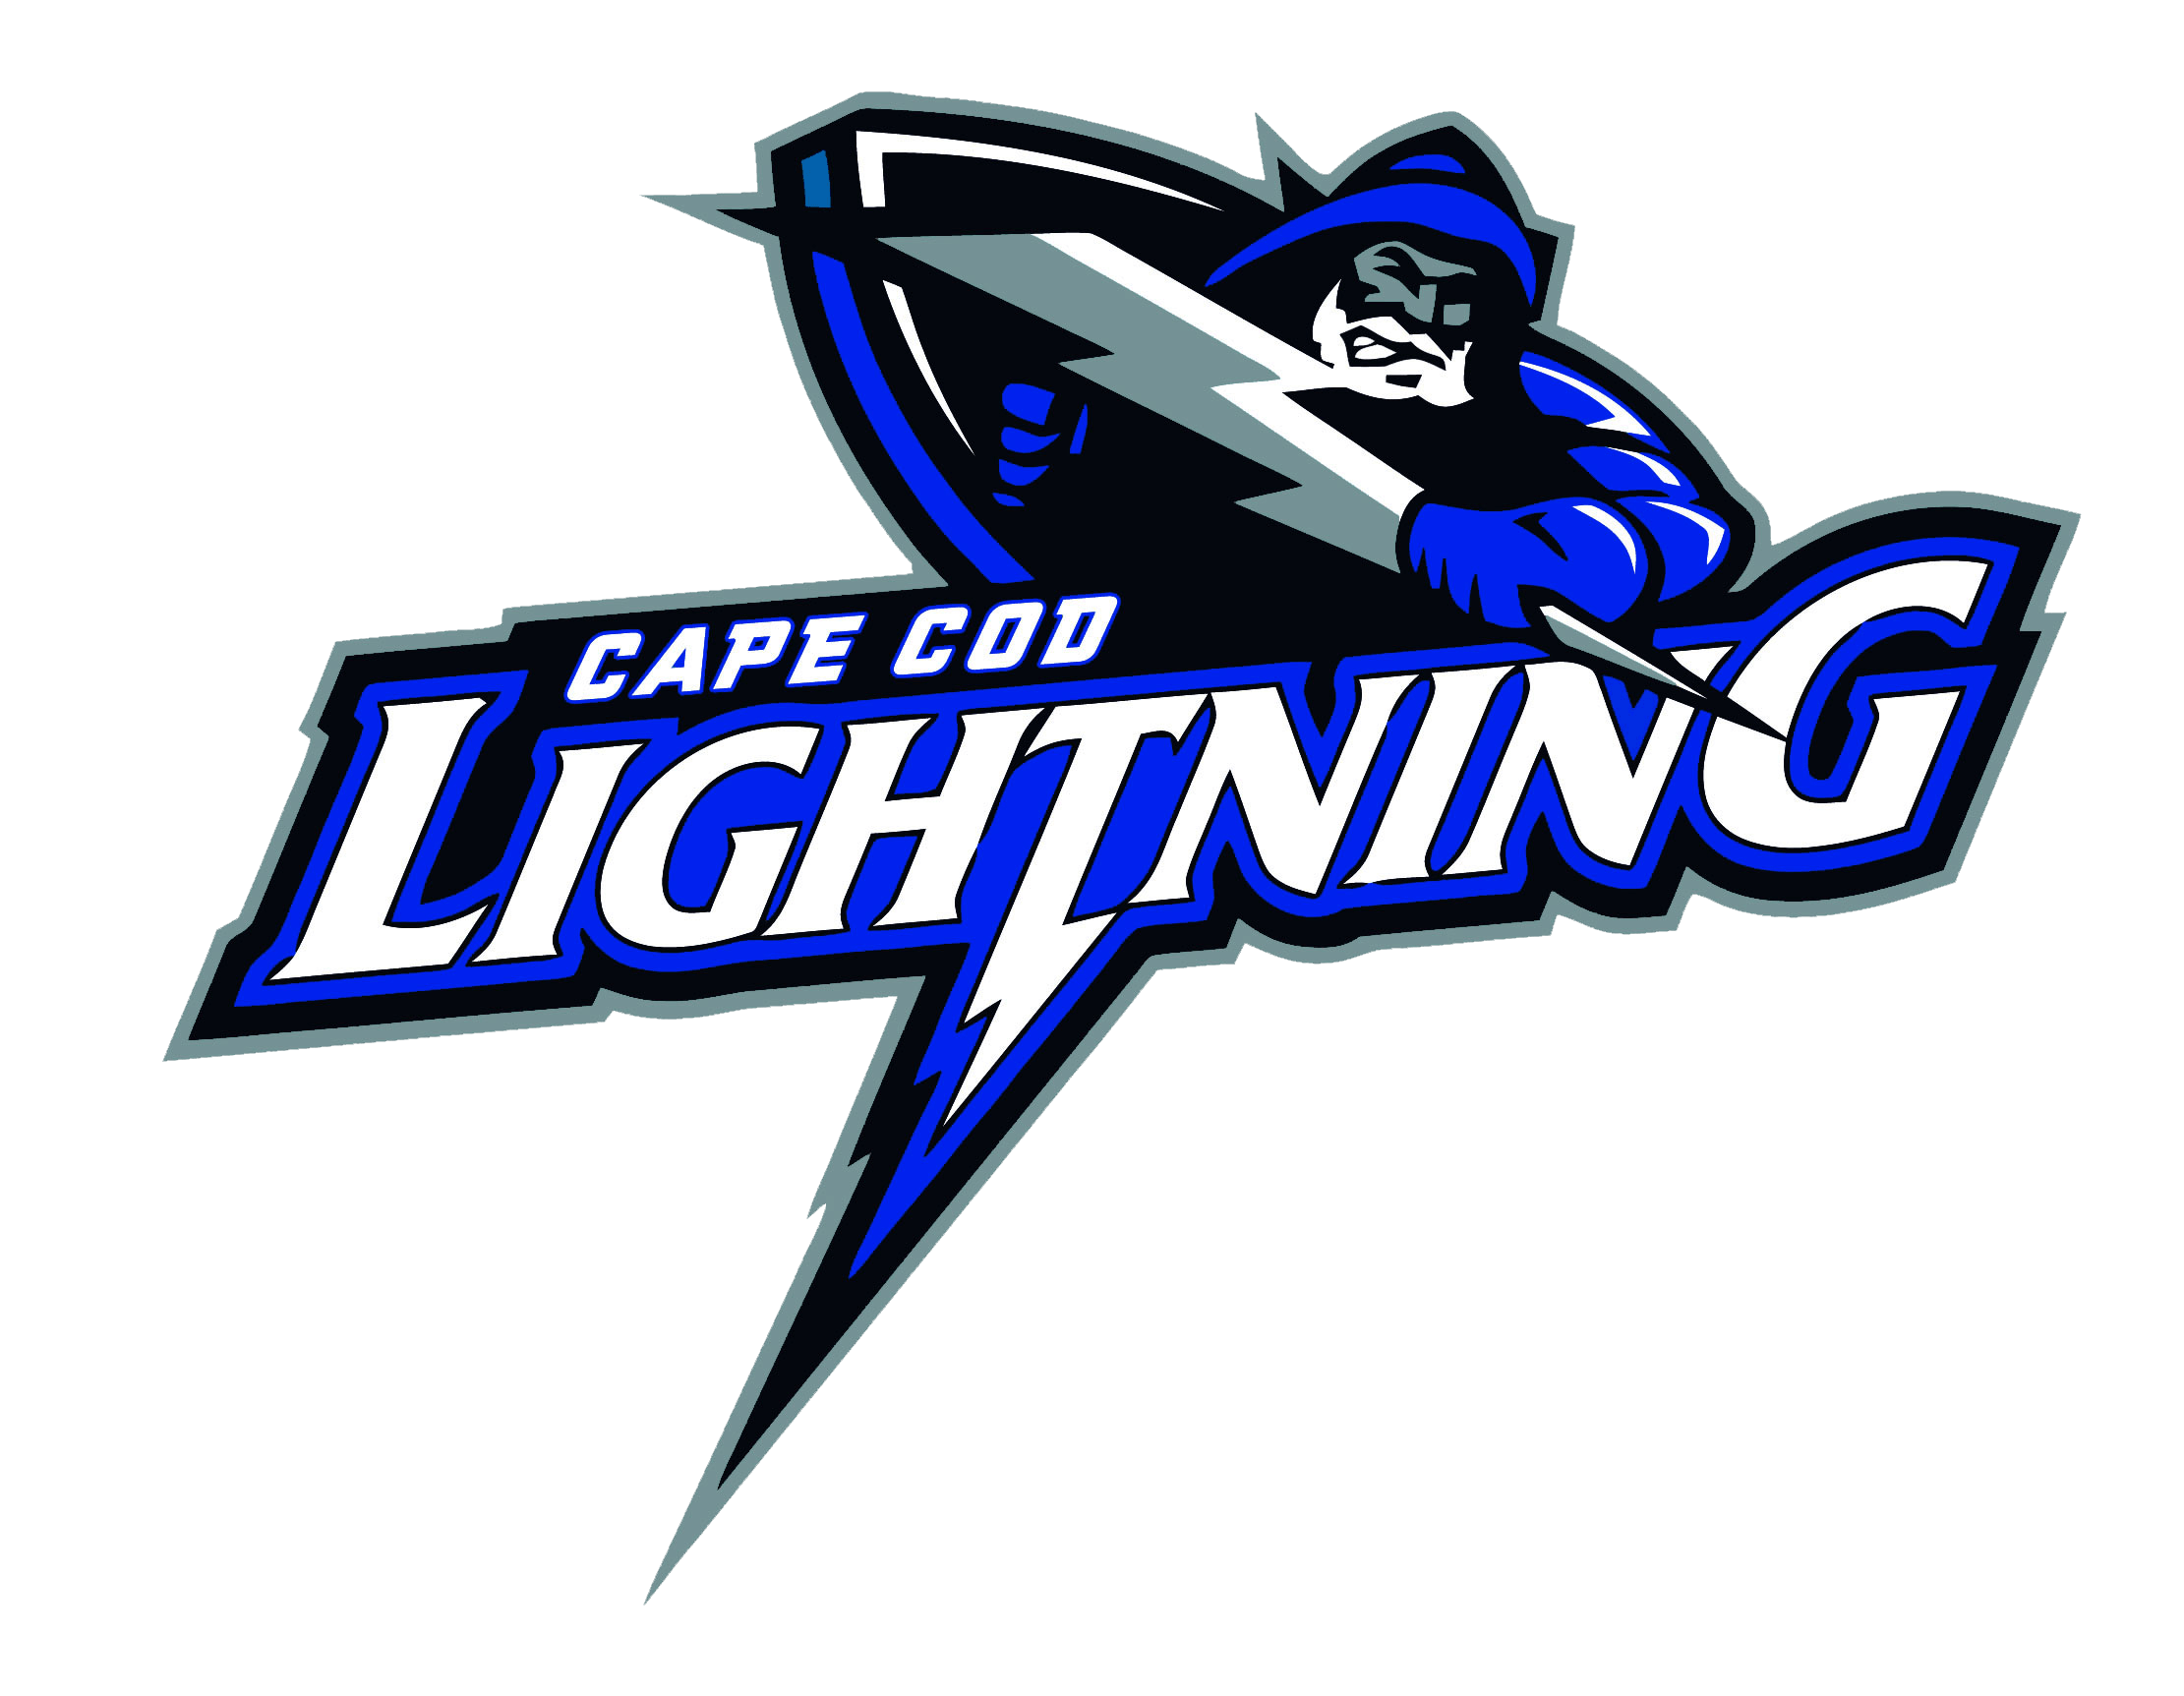 CC Lightning Logo - Our Mission. Falmouth Youth Hockey League